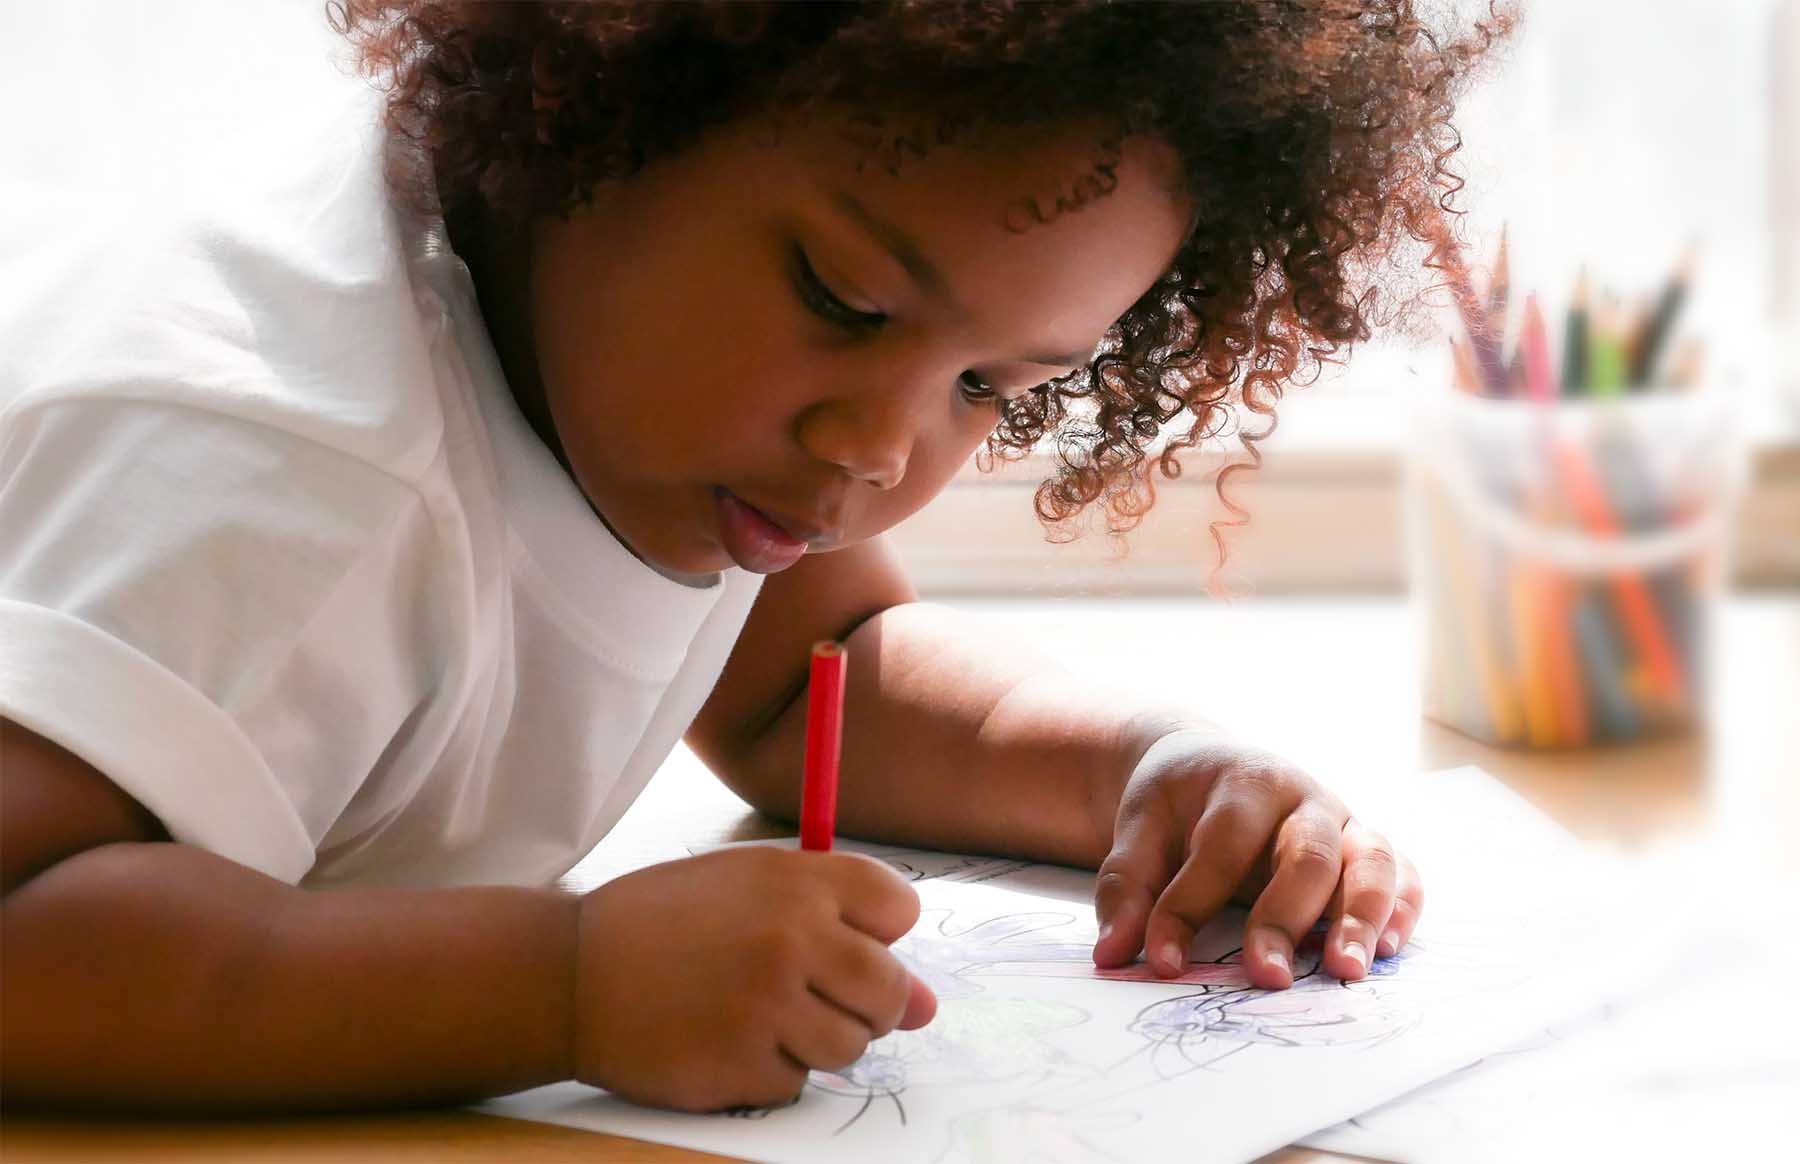 A young girl in a white shirt uses a red pencil to draw on a piece of paper